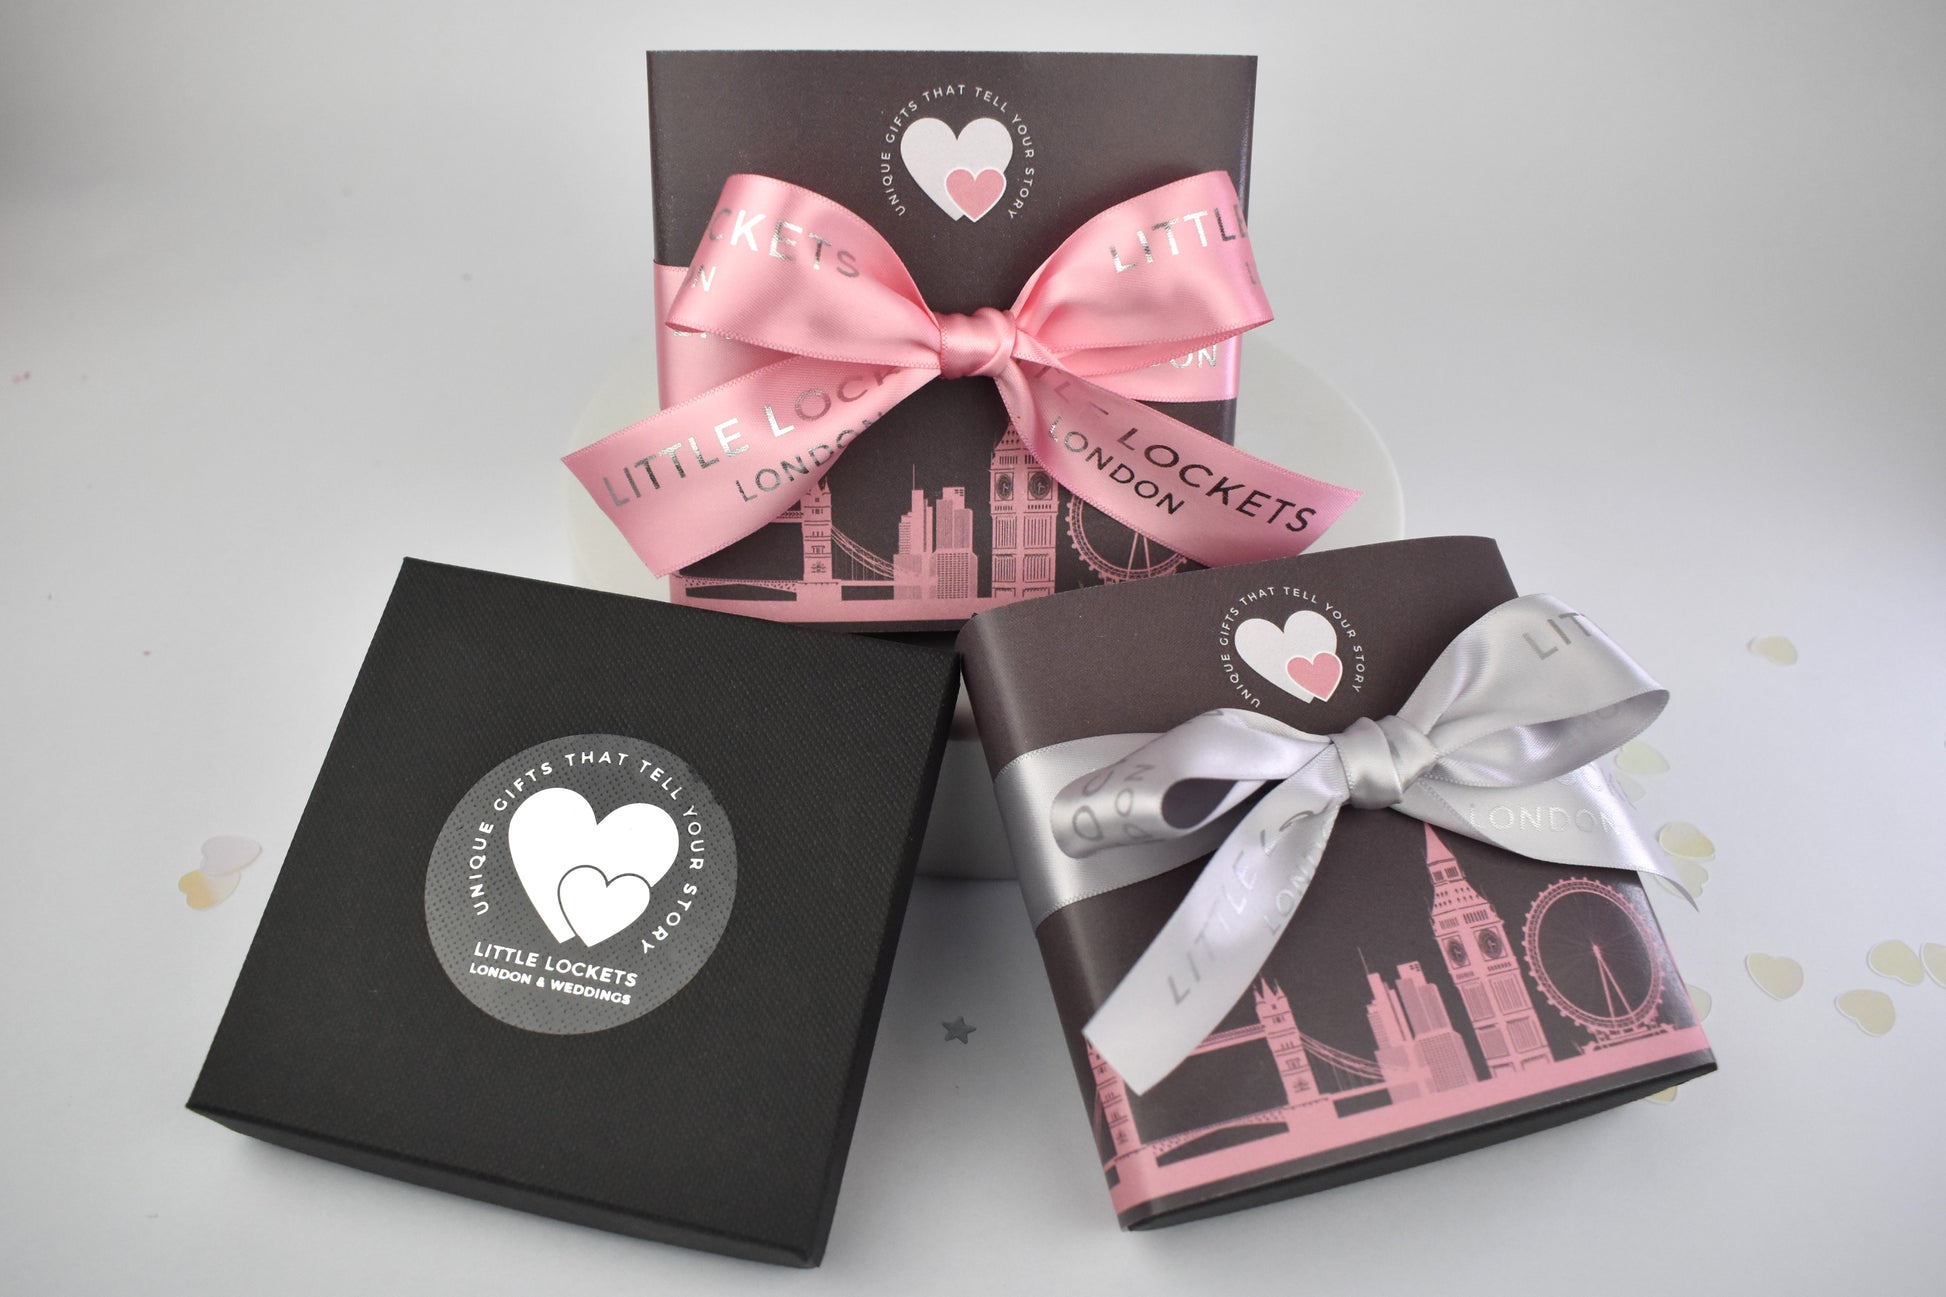 Your choice of gift wrap - free branded gift box or upgrade to a London wrap and ribbon tie